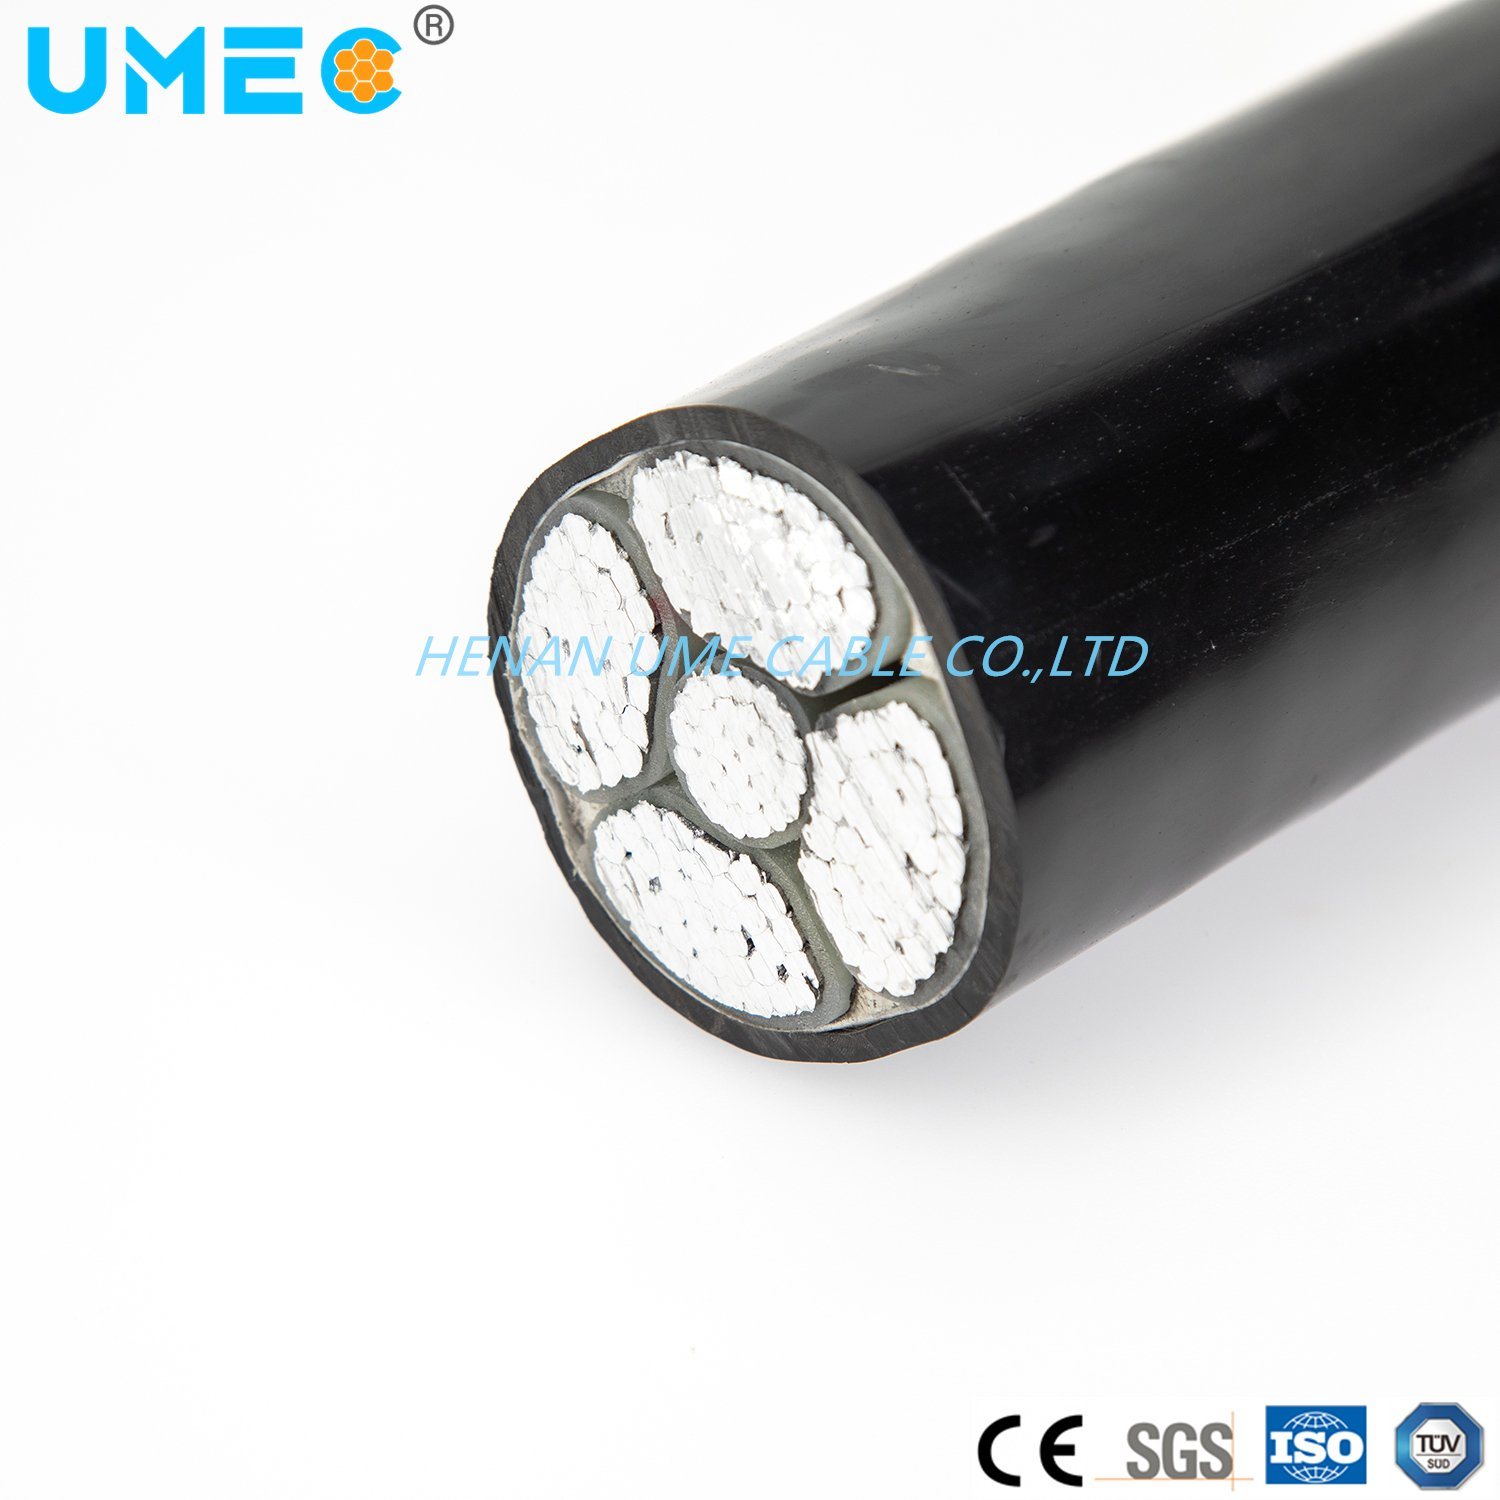 Zr-Yjlv XLPE Insulated Flame Retardant Power Cable